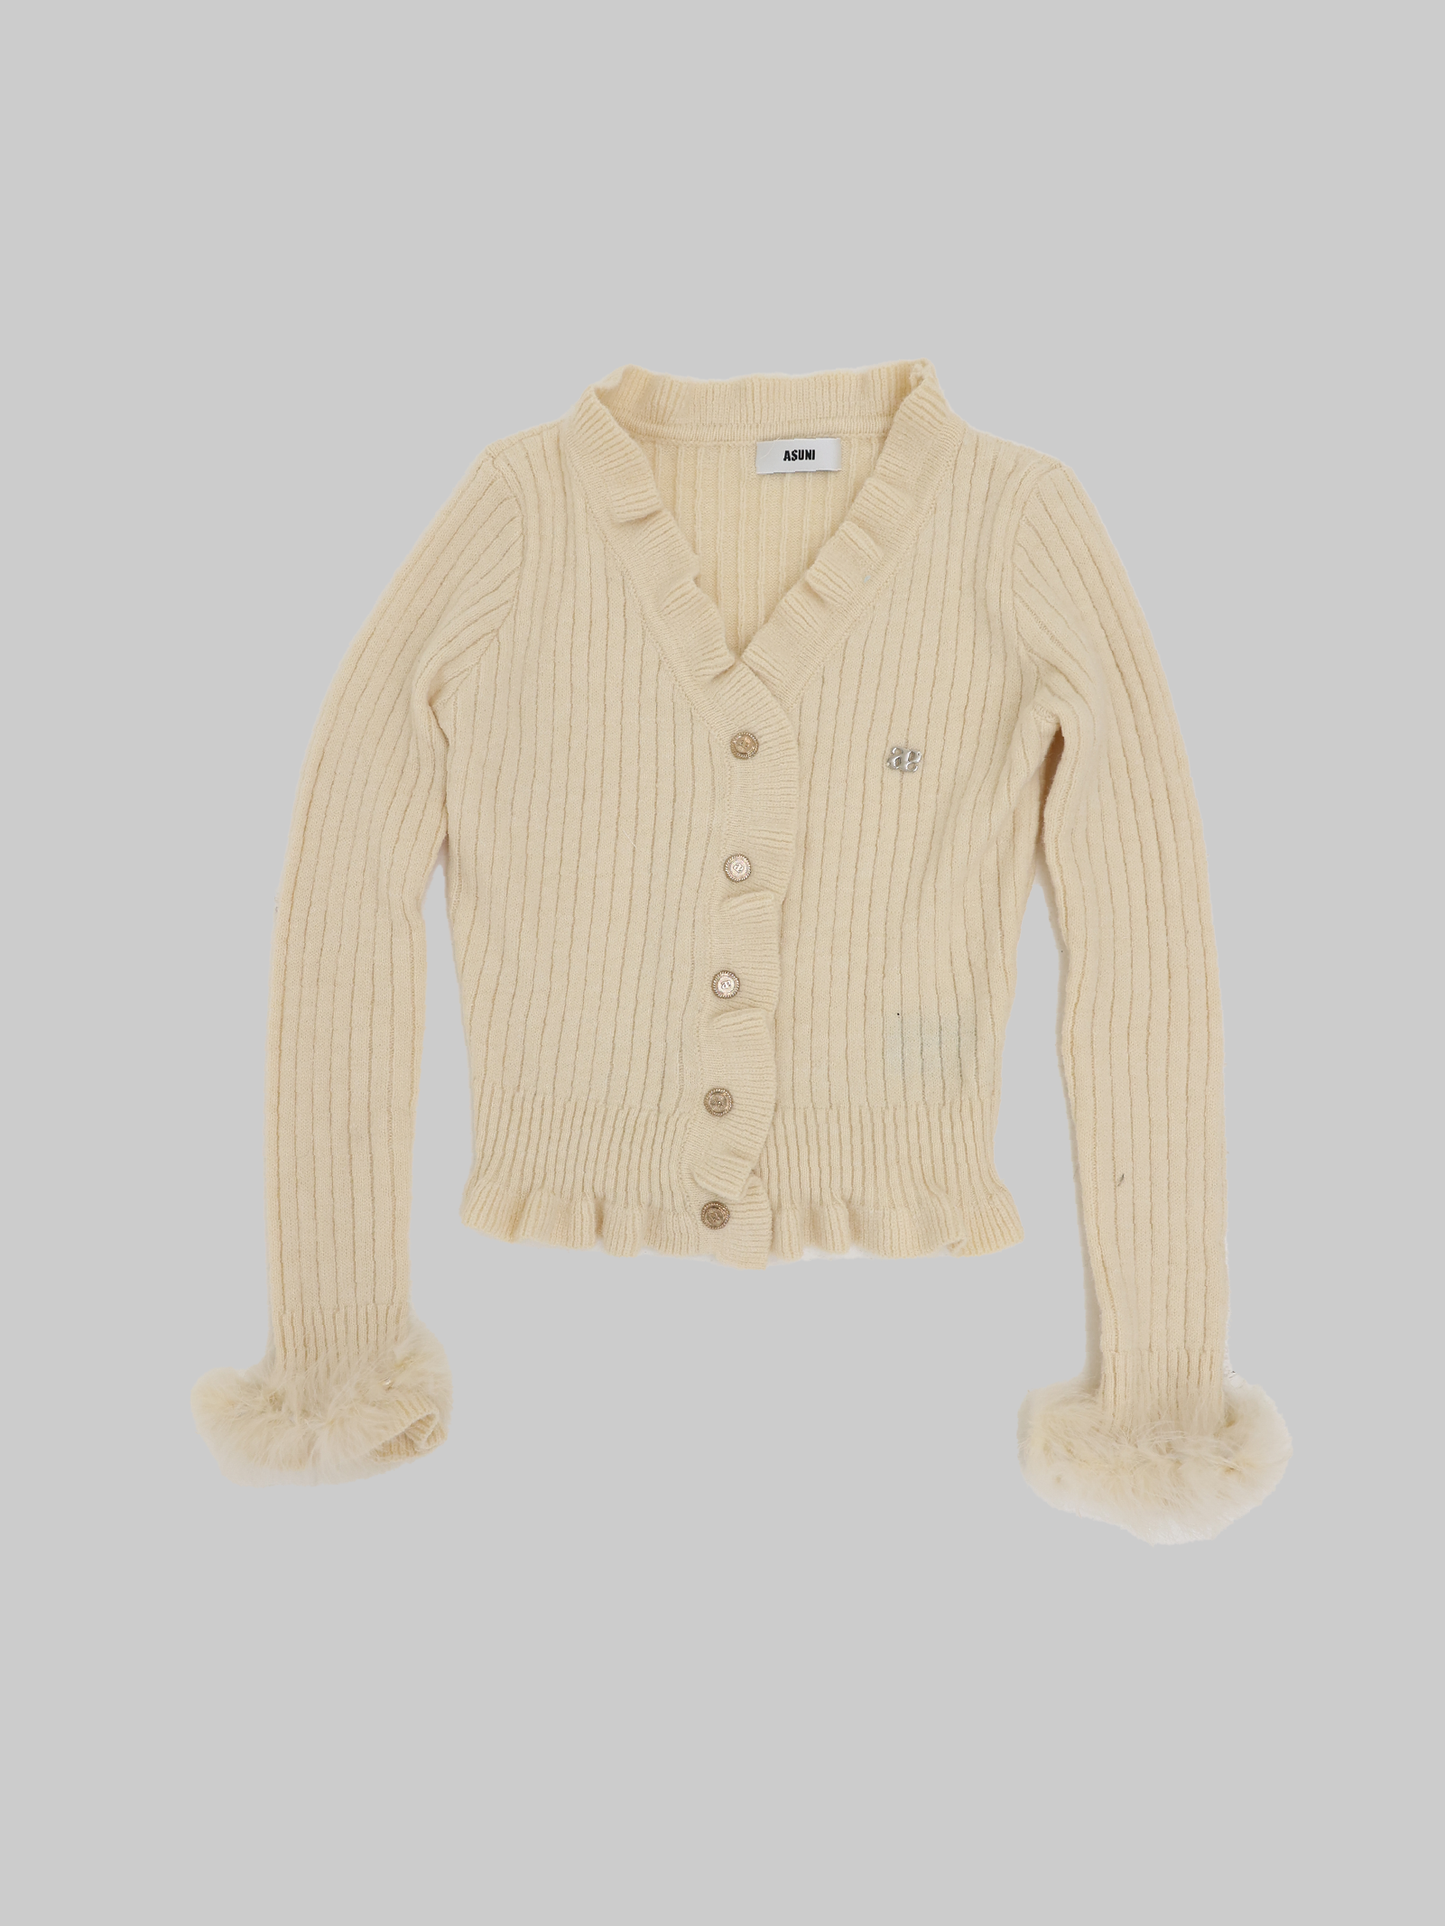 asuni Button Down Ribbed Sweater Cardigan Long Sleeve in beige